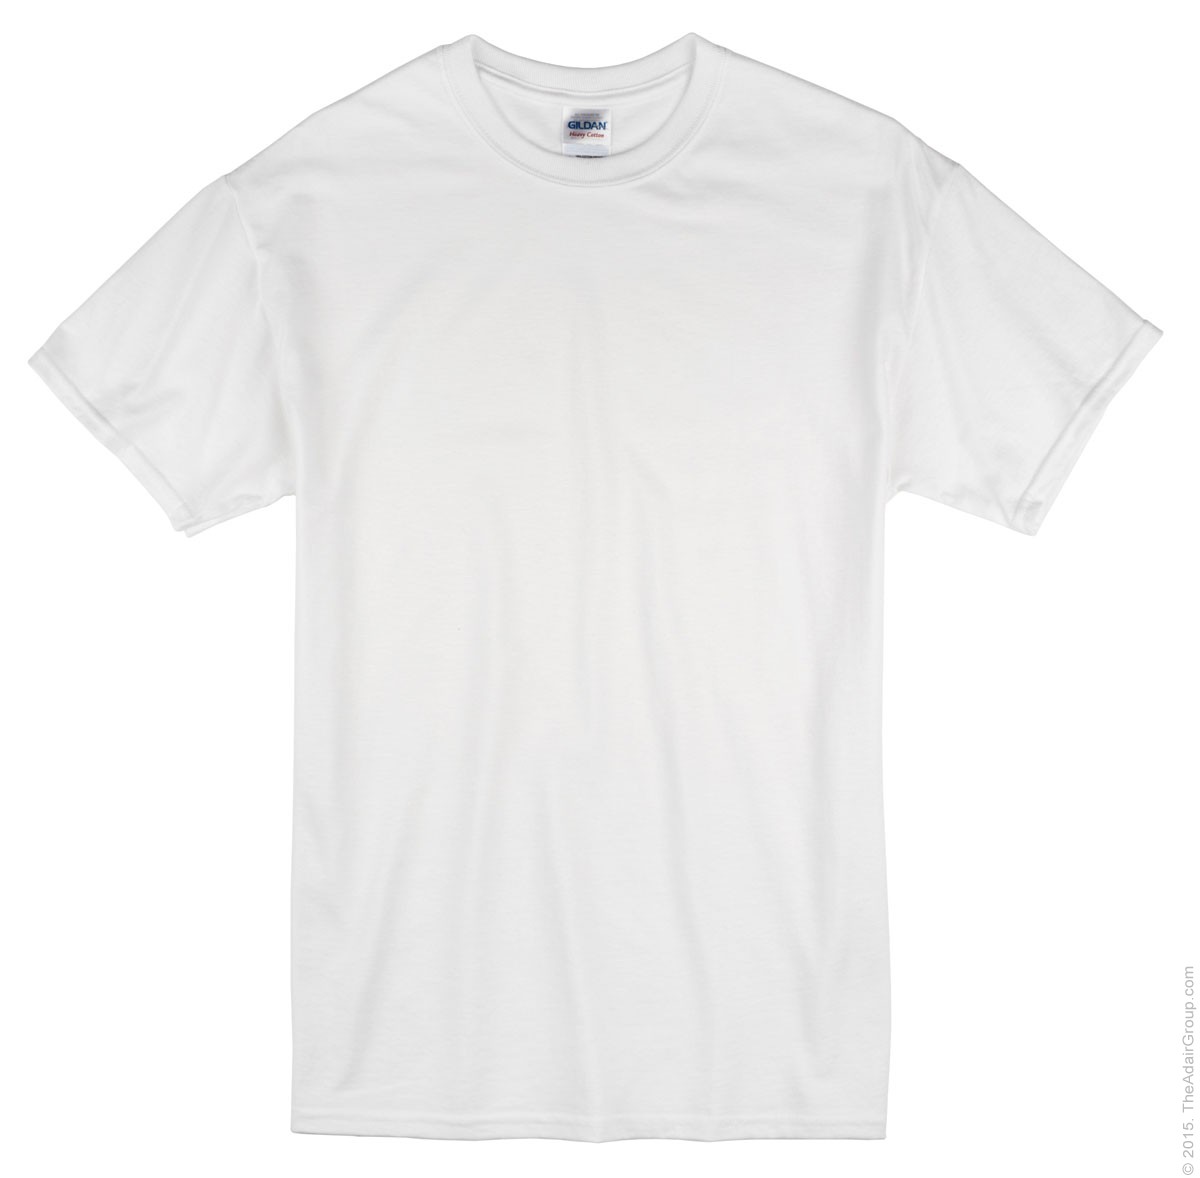 blank t shirt wholesale price in india